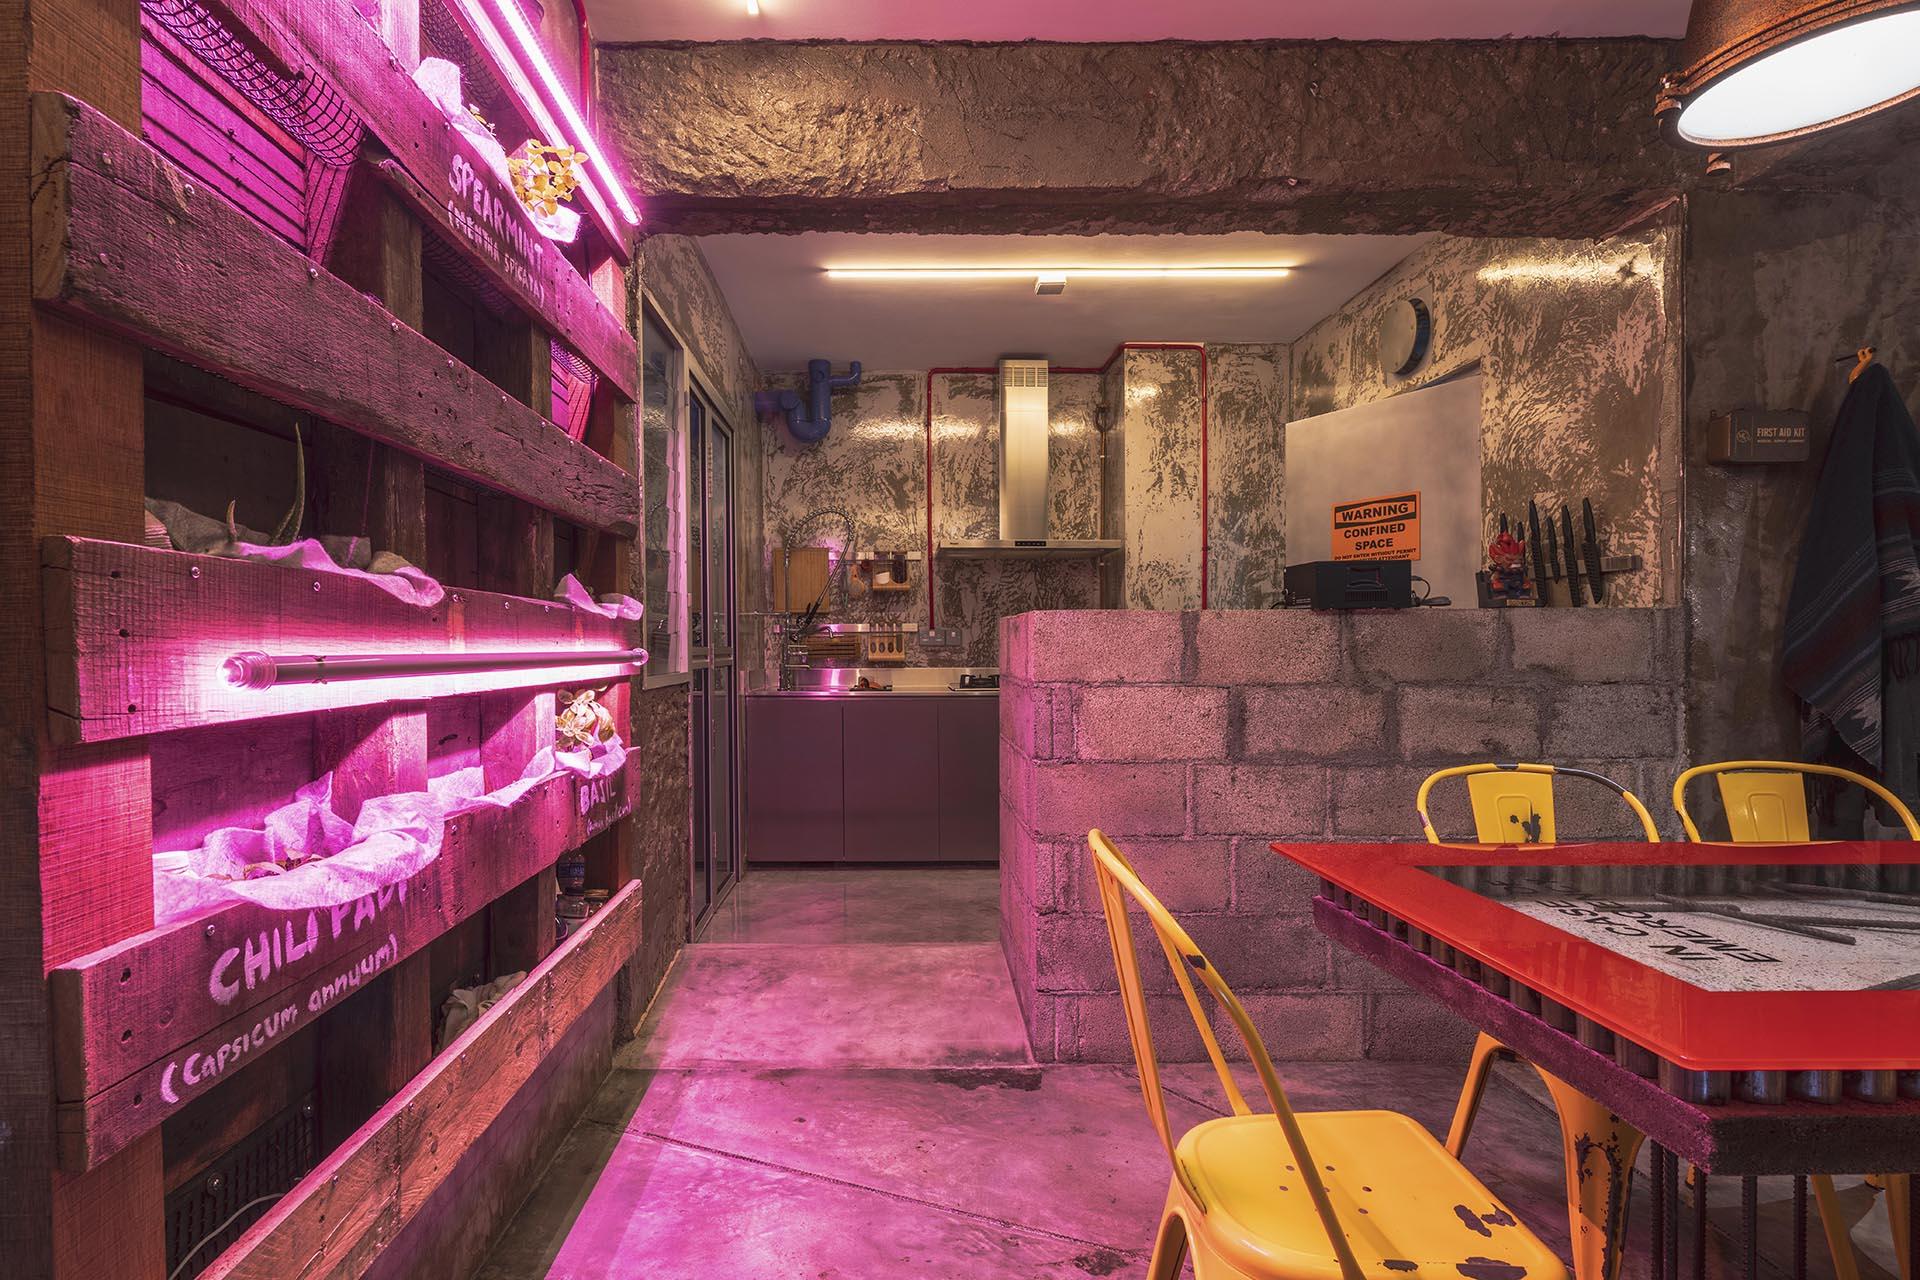 A Raw Dystopian World Inside This Singapore Flat